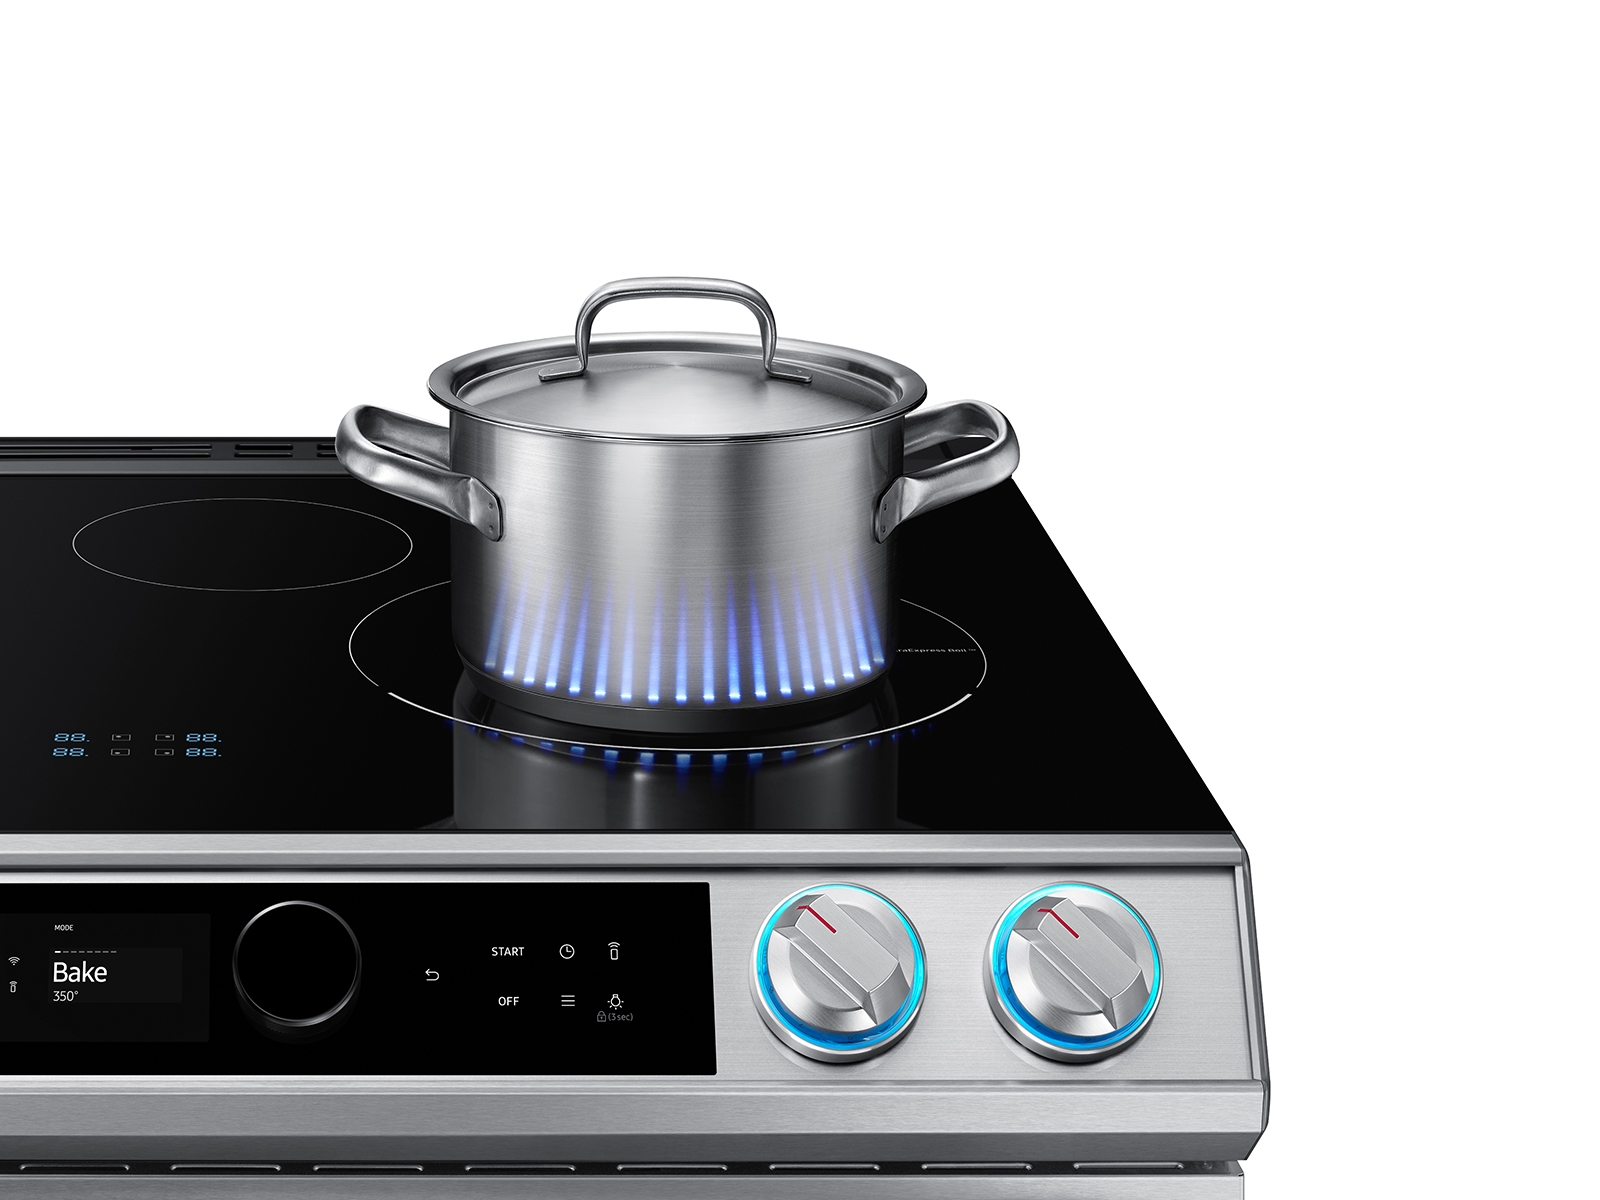 Samsung - 6.3 Cu. ft. Smart Instant Heat Slide-in Induction Range with Air Fry & Convection+ - Stainless Steel